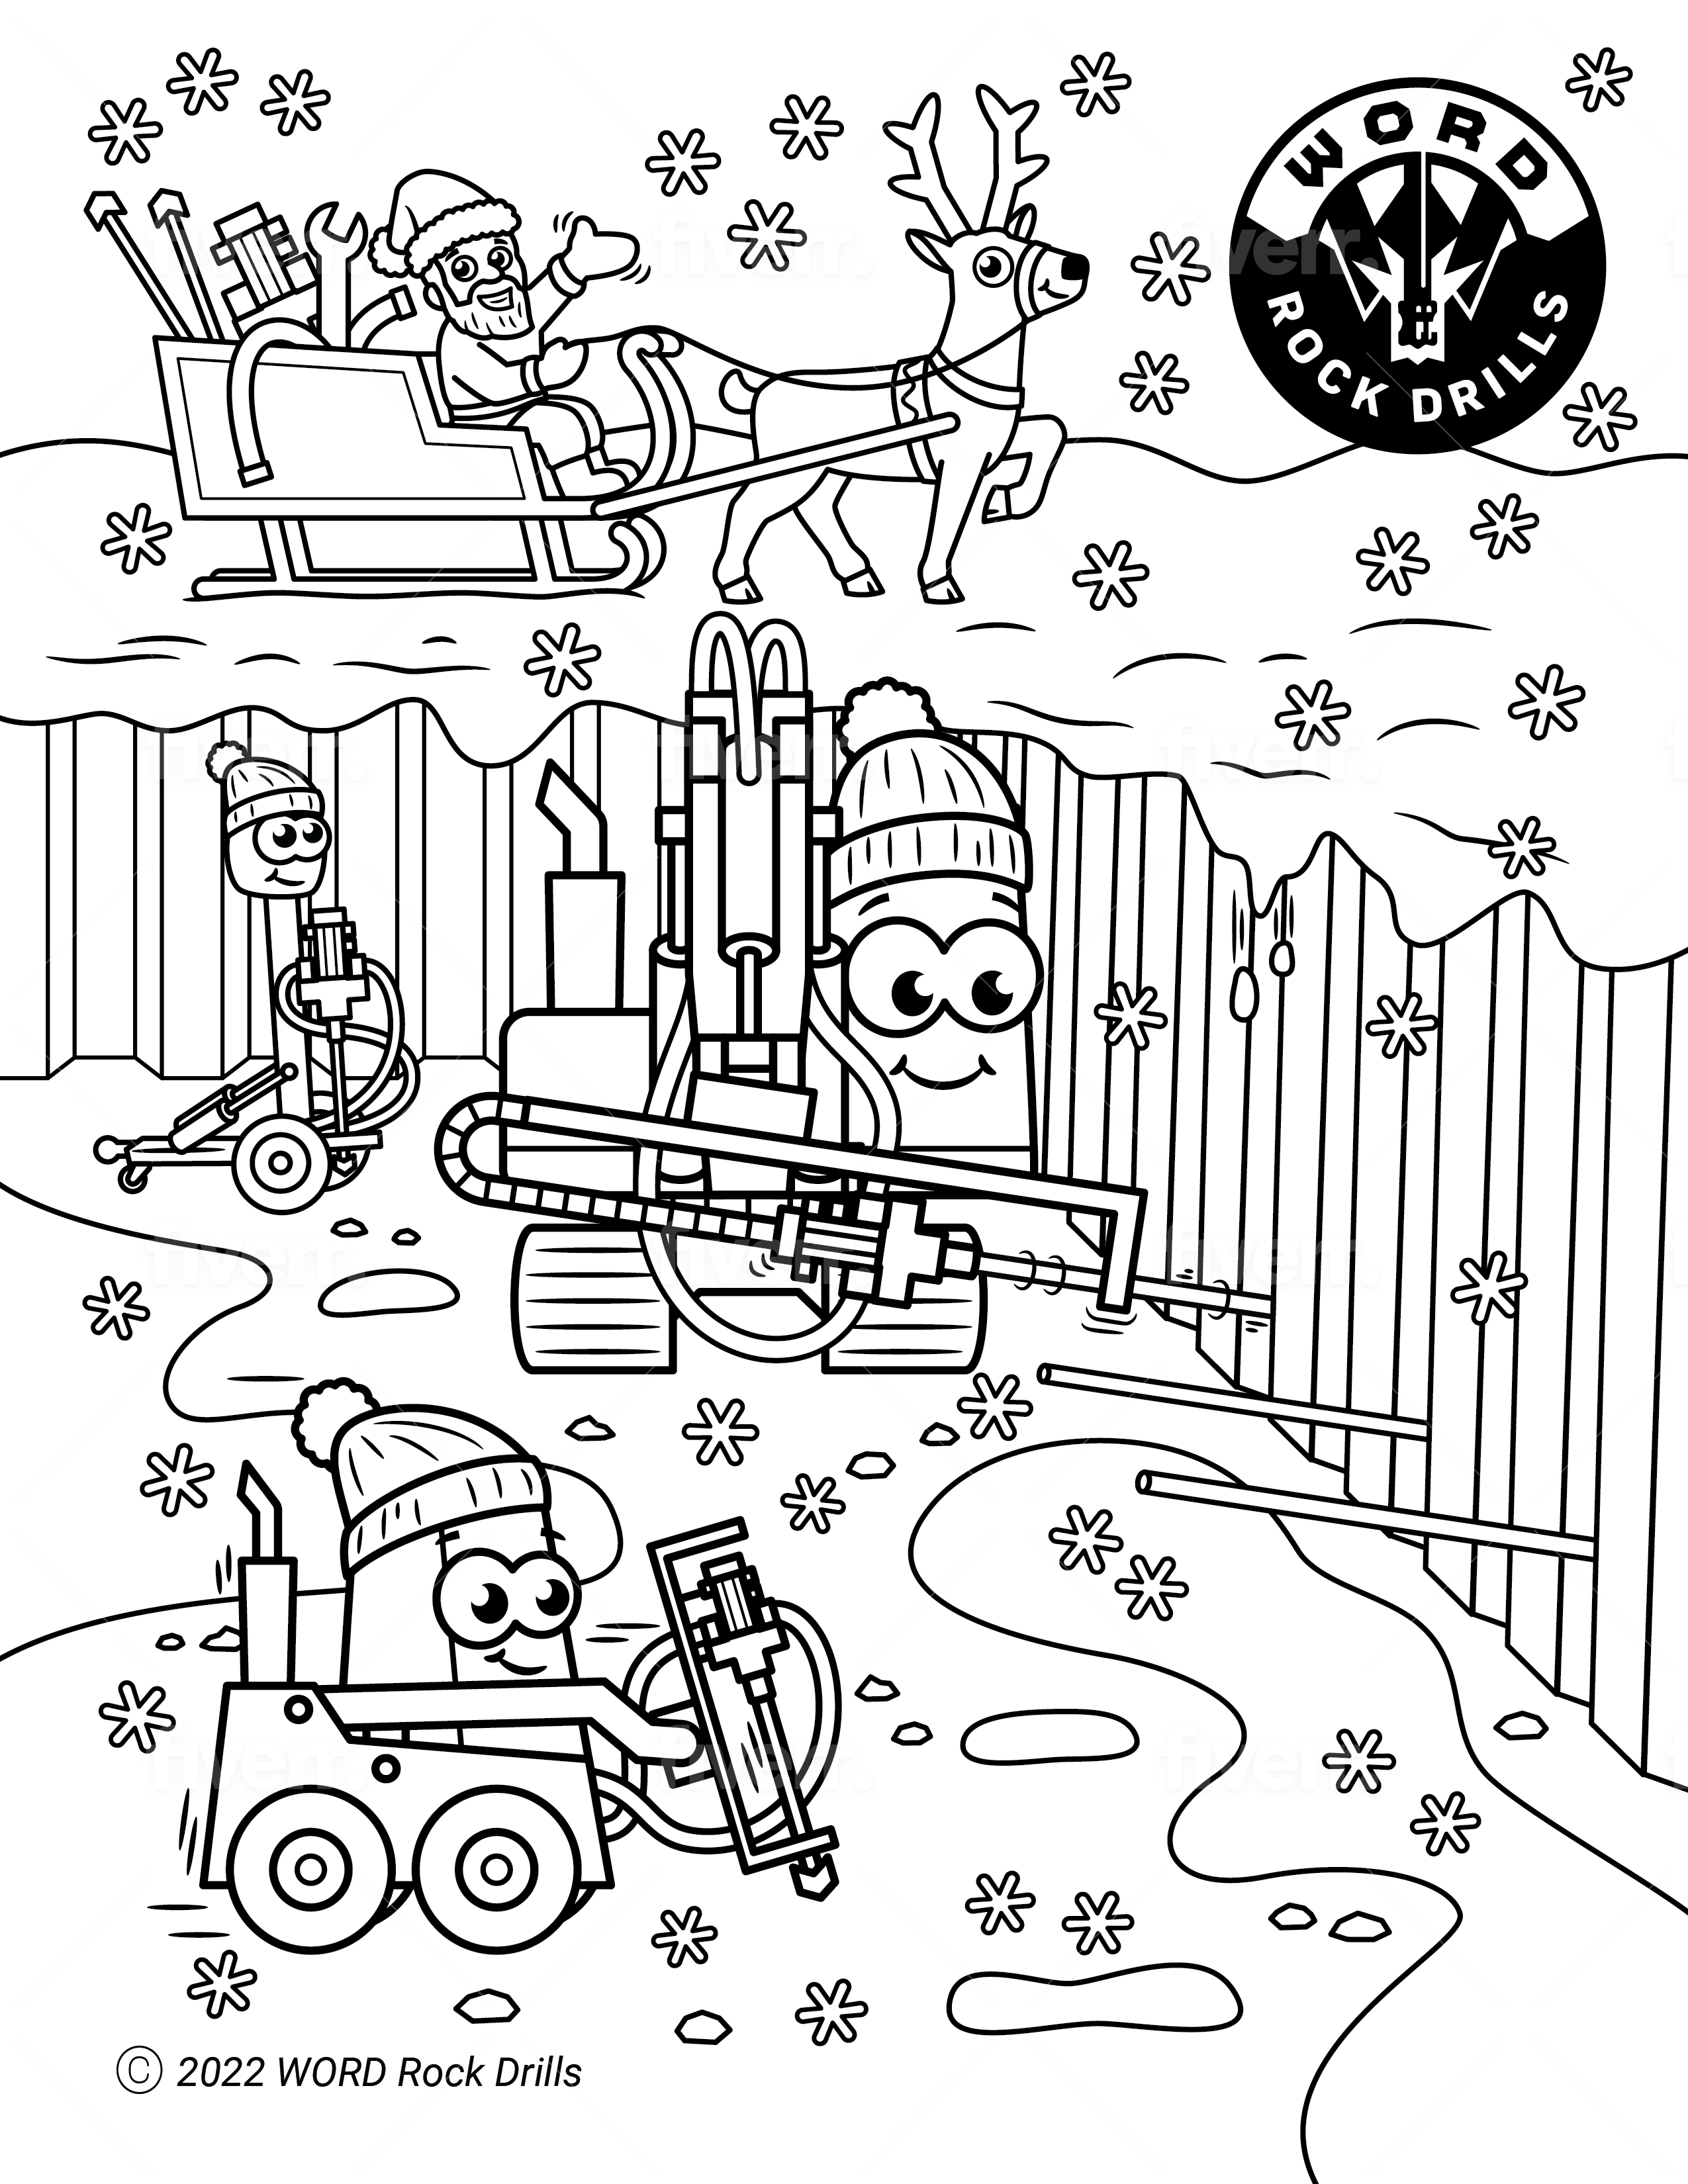 Free Rock Drill Coloring Pages to Pass the Time